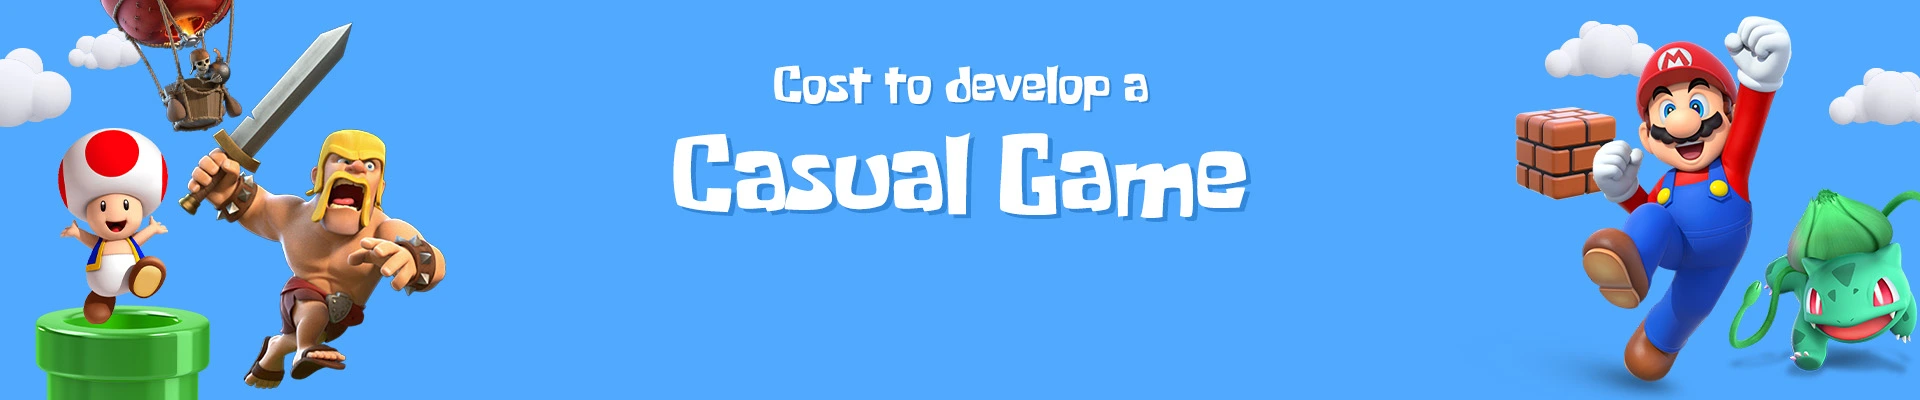 Cost to Develop a Casual Game